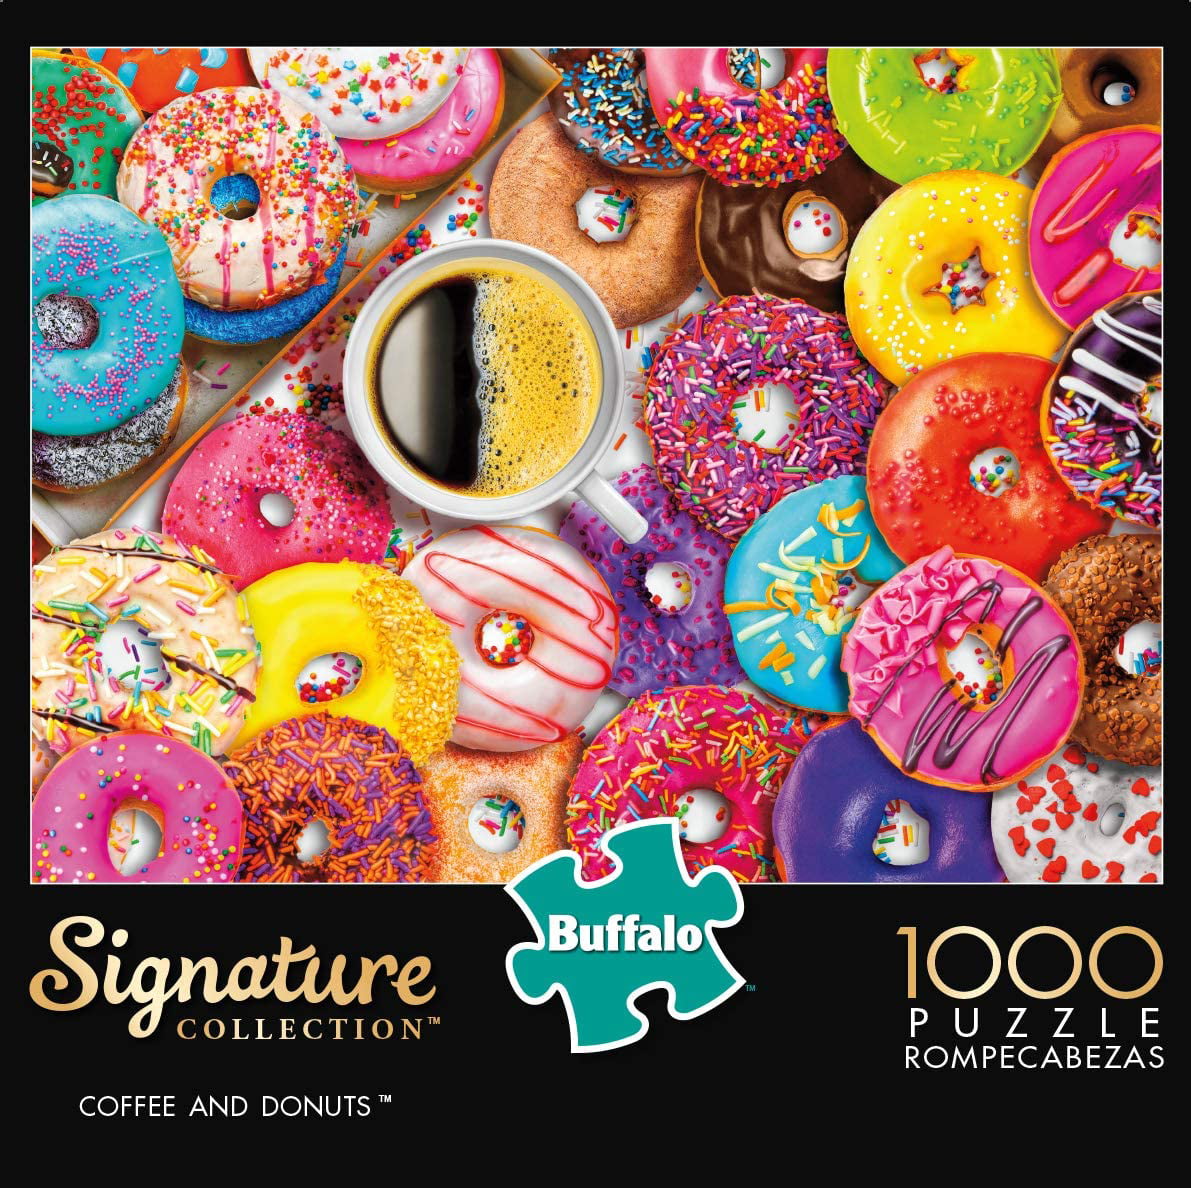 Whole Family Fun Puzzle Donuts Delight 1000 Piece Jigsaw Puzzle for Adults 